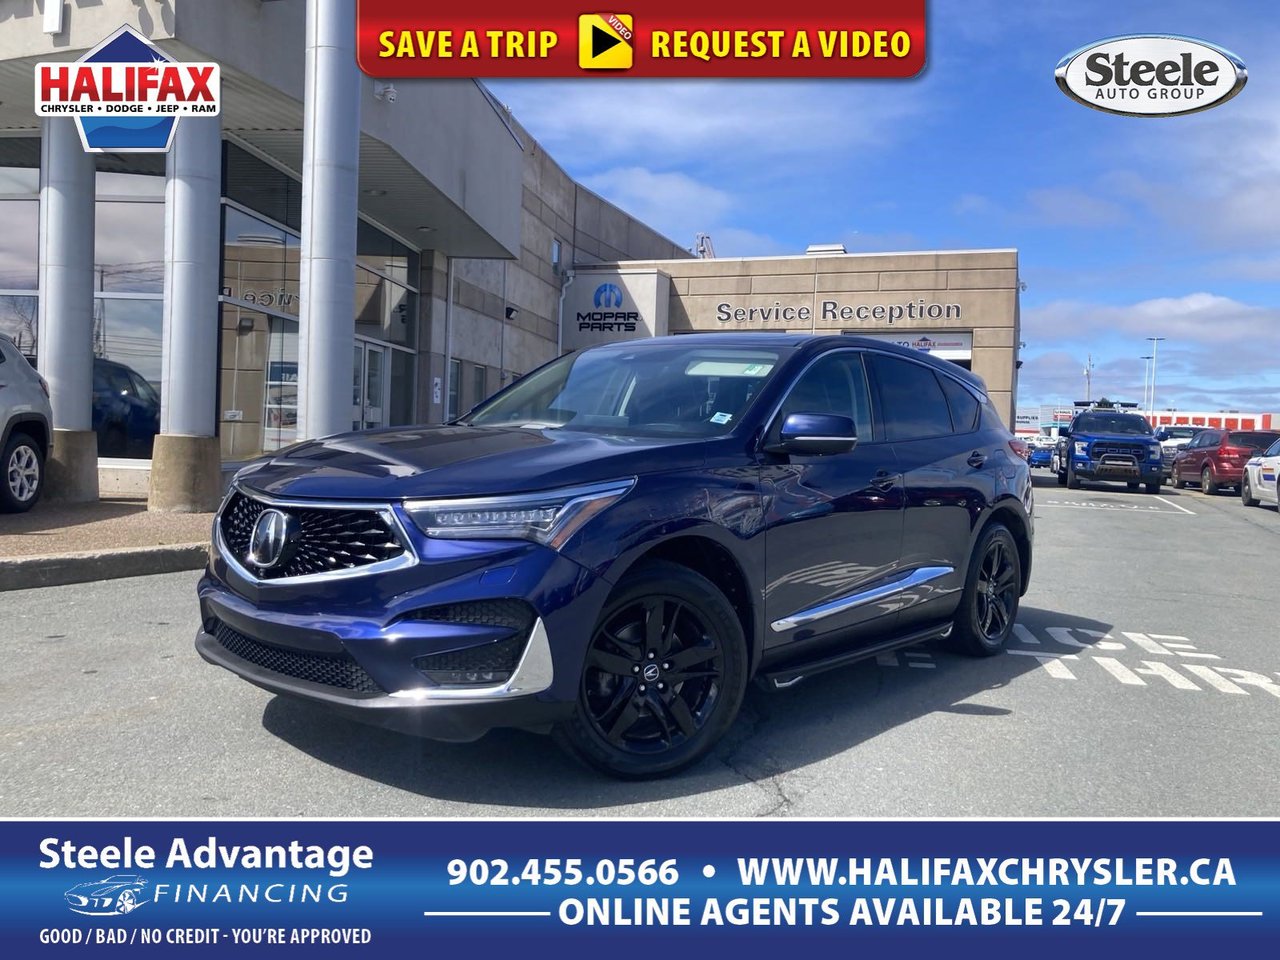 2019 Acura RDX Platinum Elite- AWD, HEATED AND COOLED MEMORY LEATHER, LOW KM, NO ACCIDENTS, SUNROOF-0